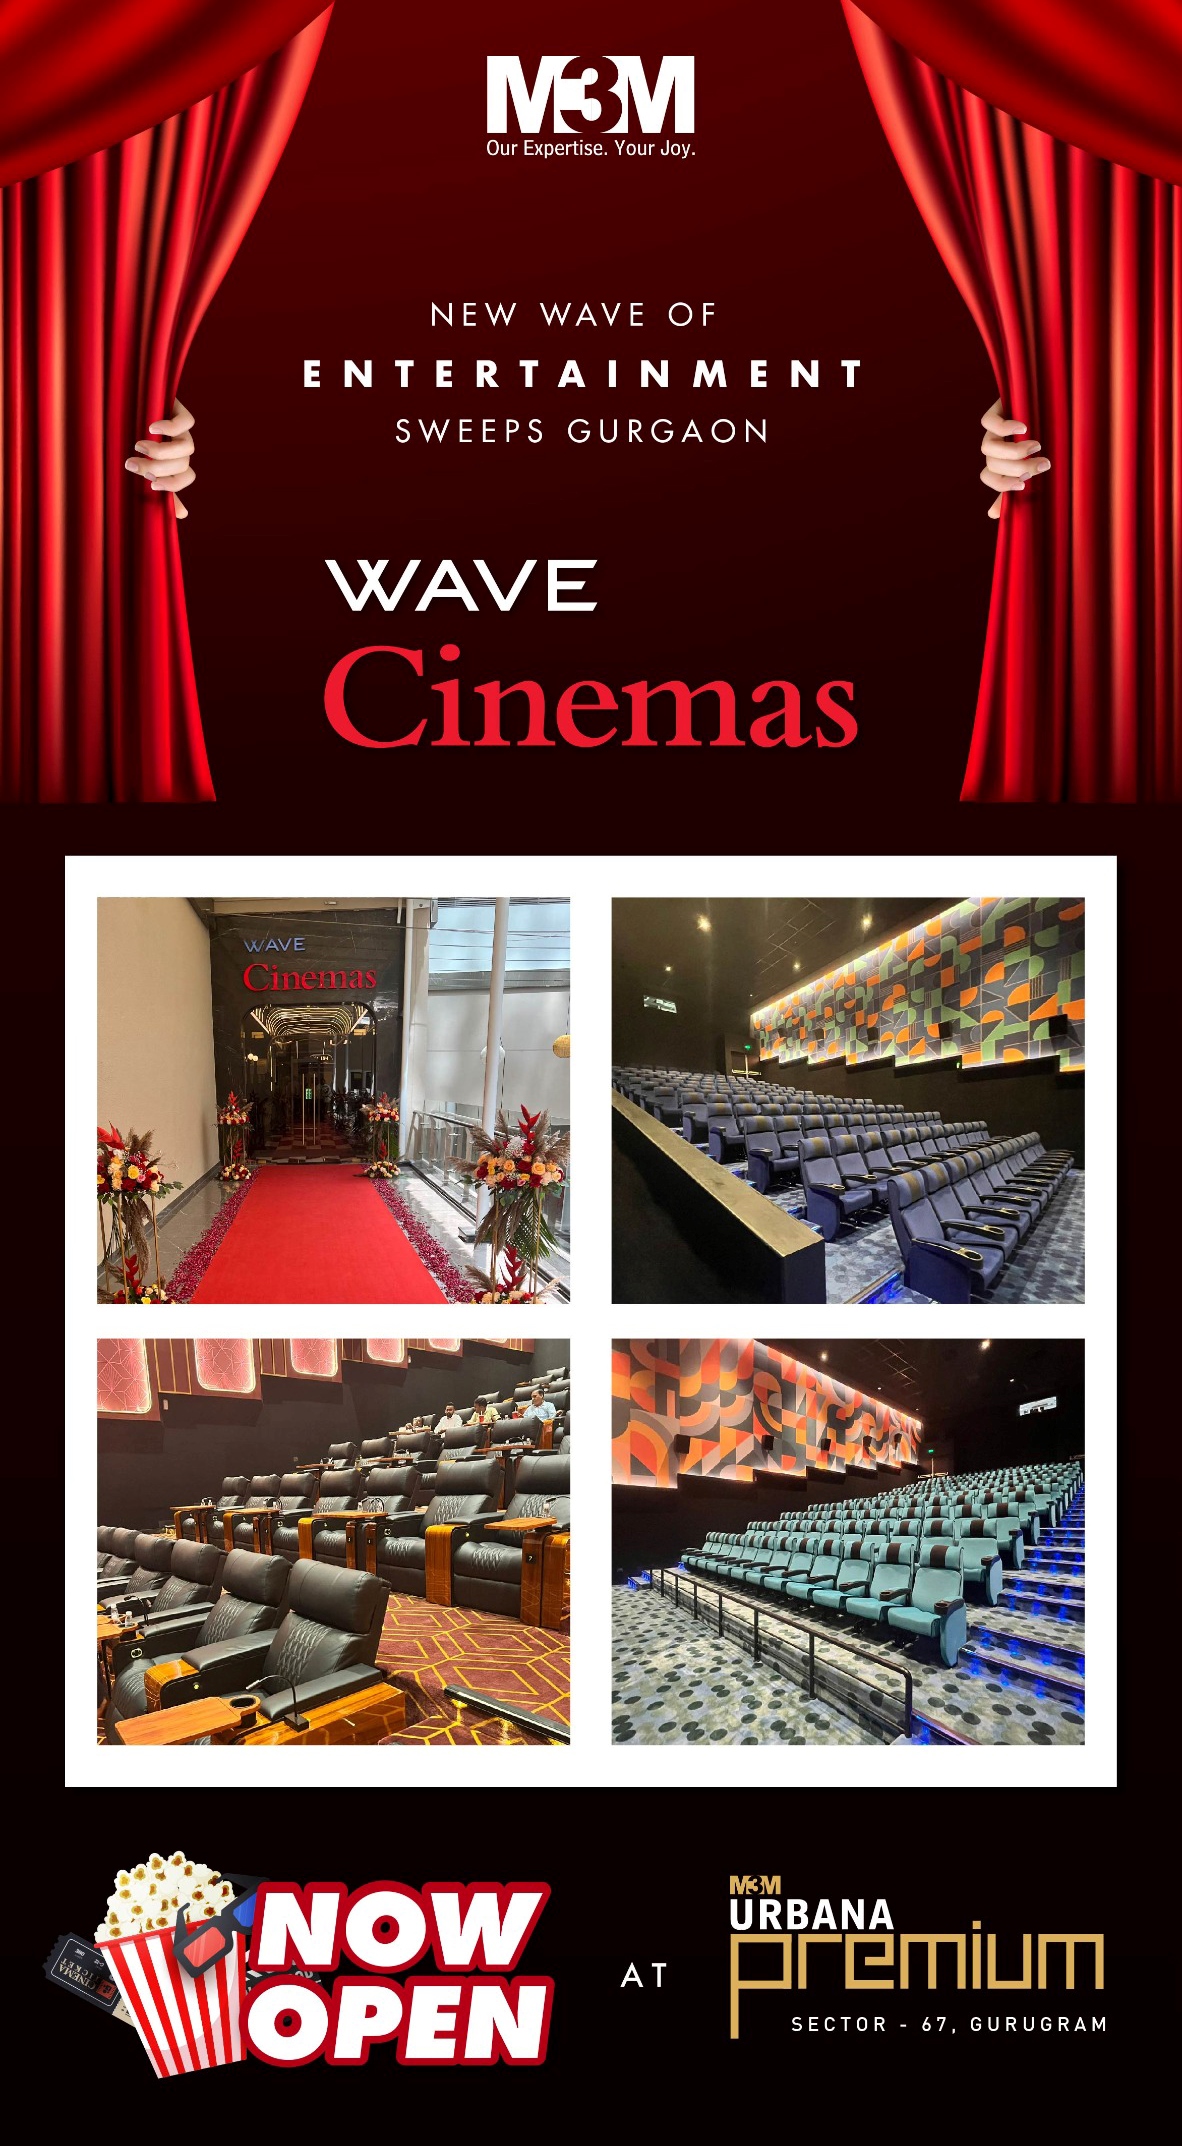 Get ready for blockbuster bliss with Wave Cinemas now open at M3M Urbana Premium, Gurgaon